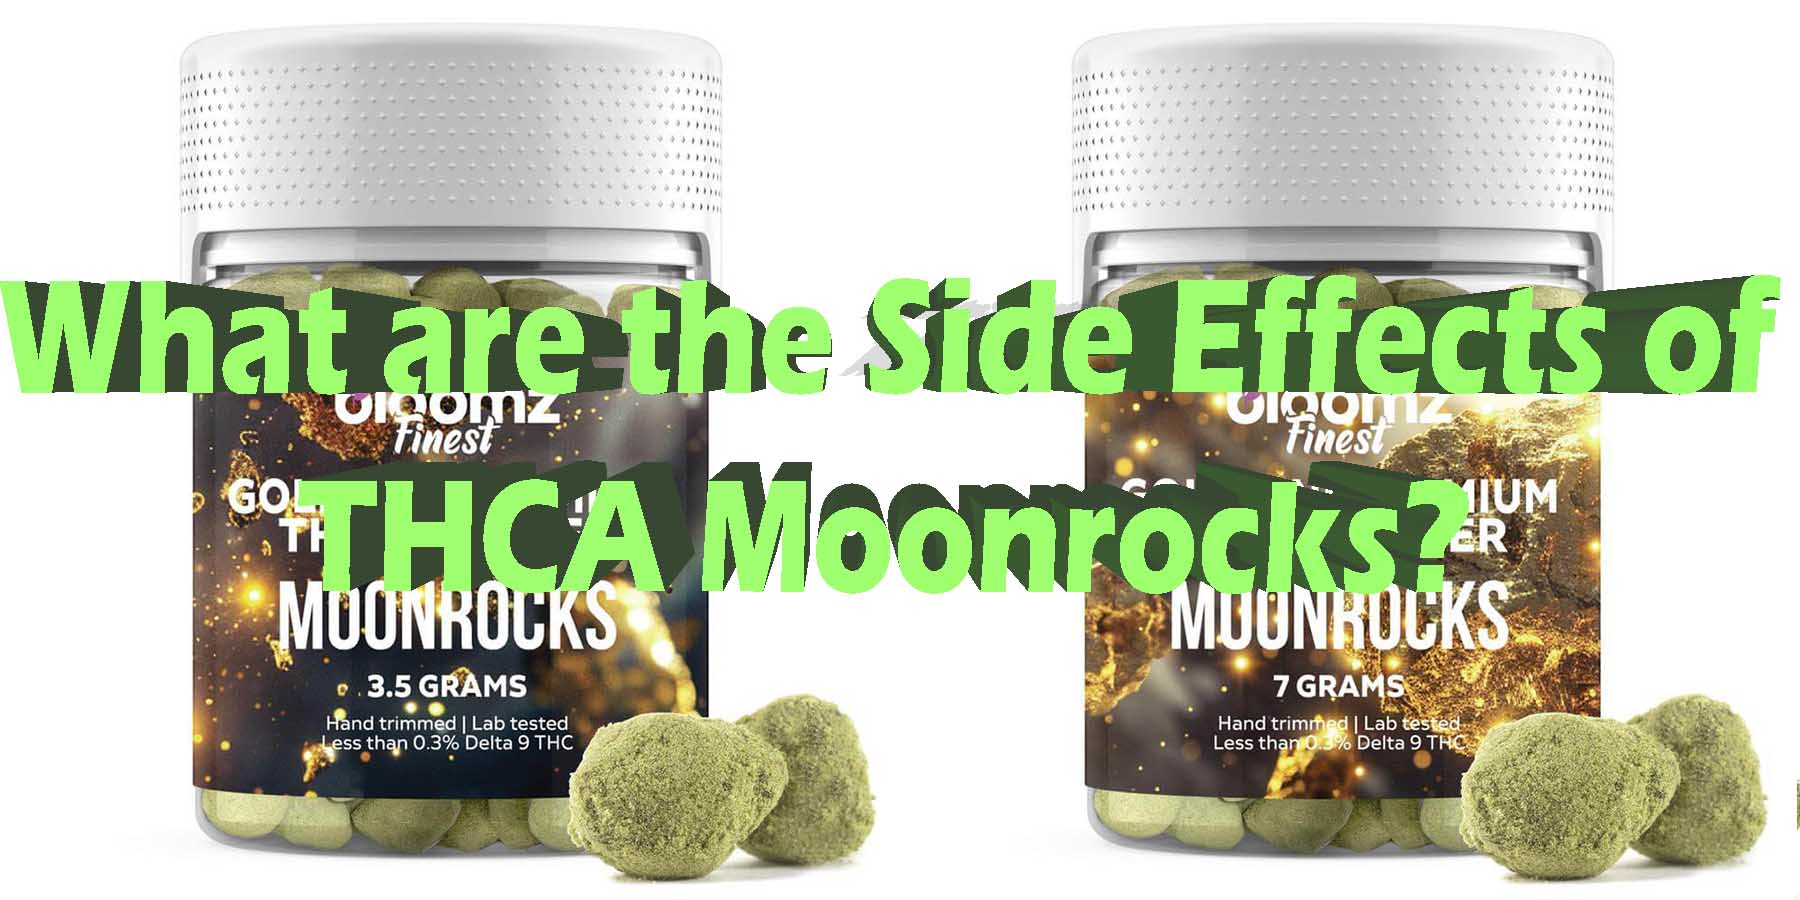 What are the Side Effects of THCA Moonrocks Legal THC LowestPrice Coupon Discount For Smoking BestHigh Smoke Shop Online Near Me Online Smoke Shop StrongestBrand Best Bloomz.